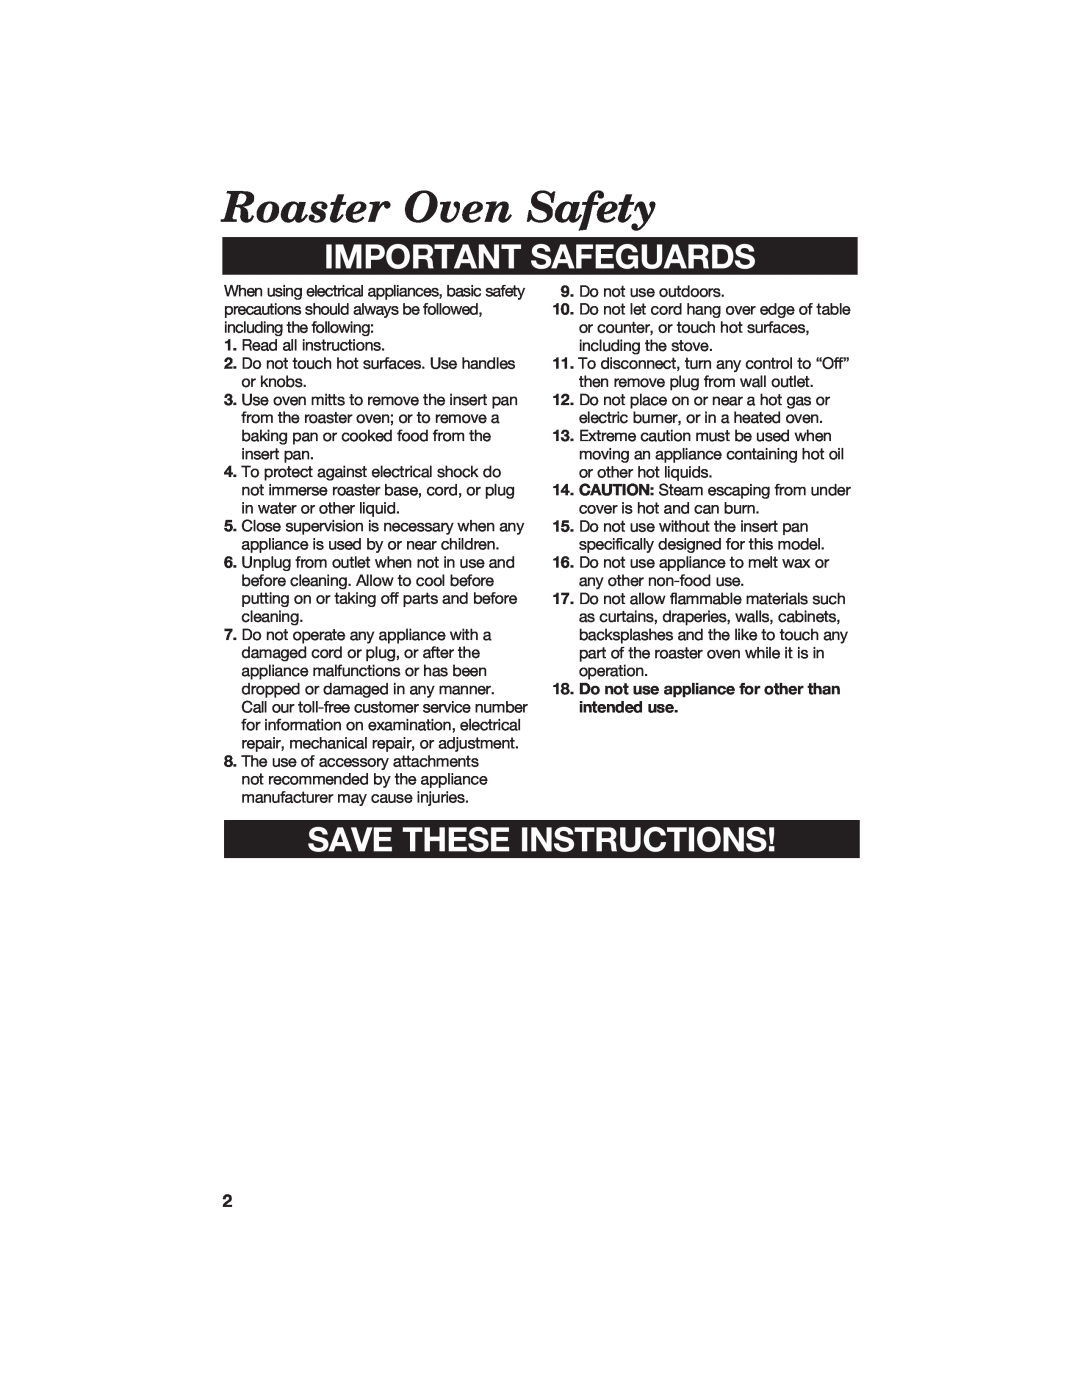 Hamilton Beach manual Roaster Oven Safety, Important Safeguards, Save These Instructions 